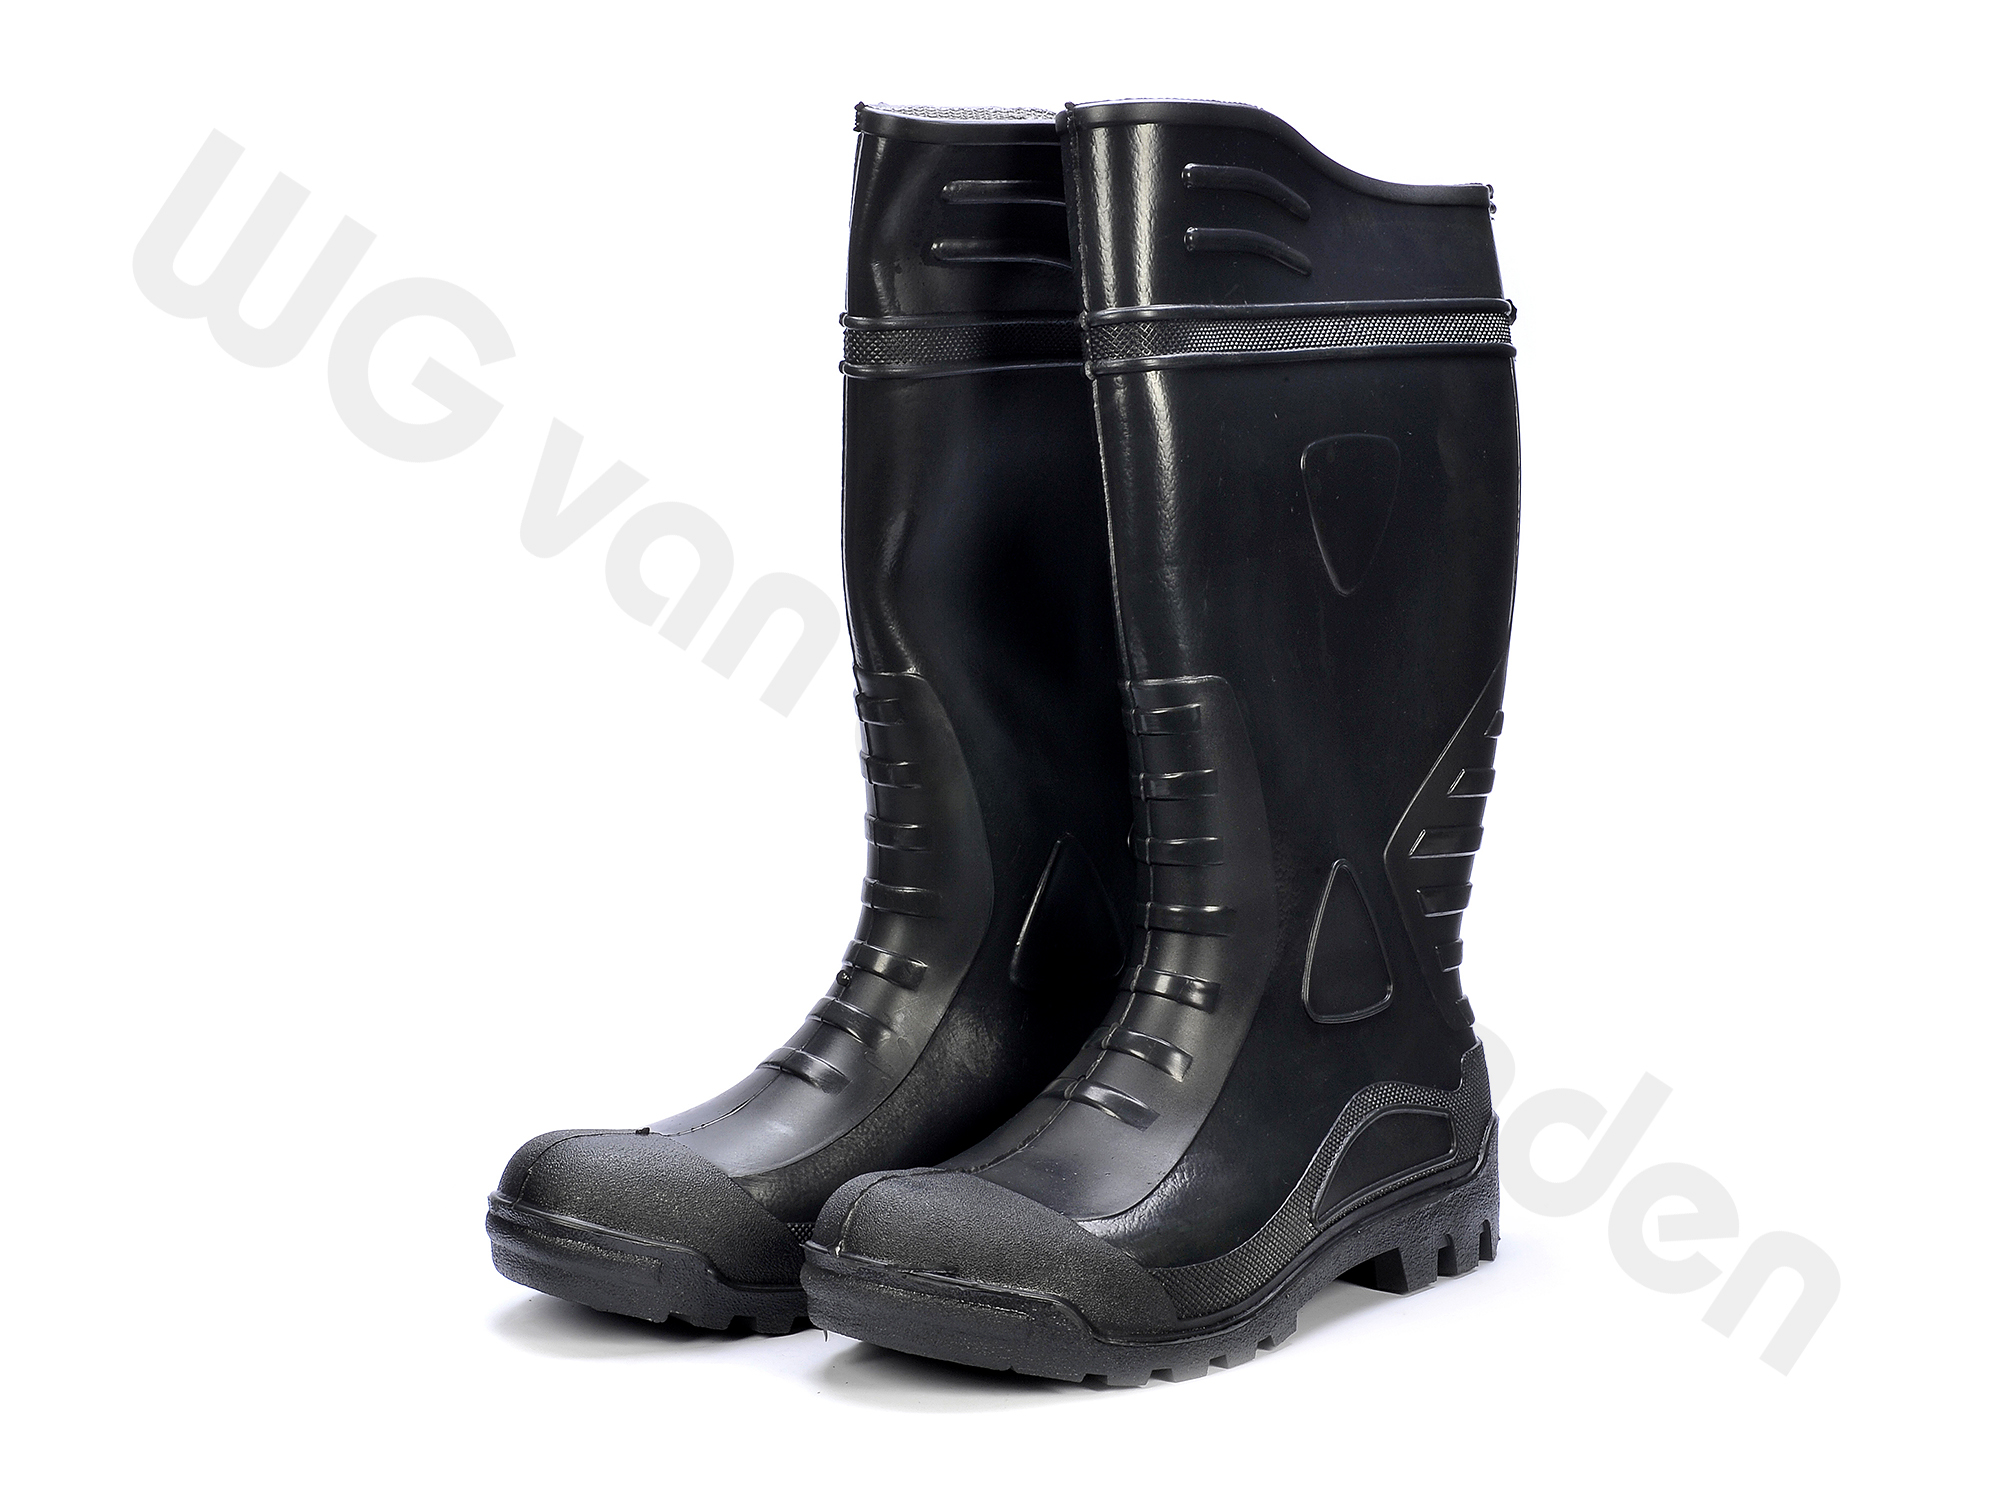 880208 BOOTS SAFETY S4 PVC WITH STEEL TOE SIZE 45/28.5CM CE